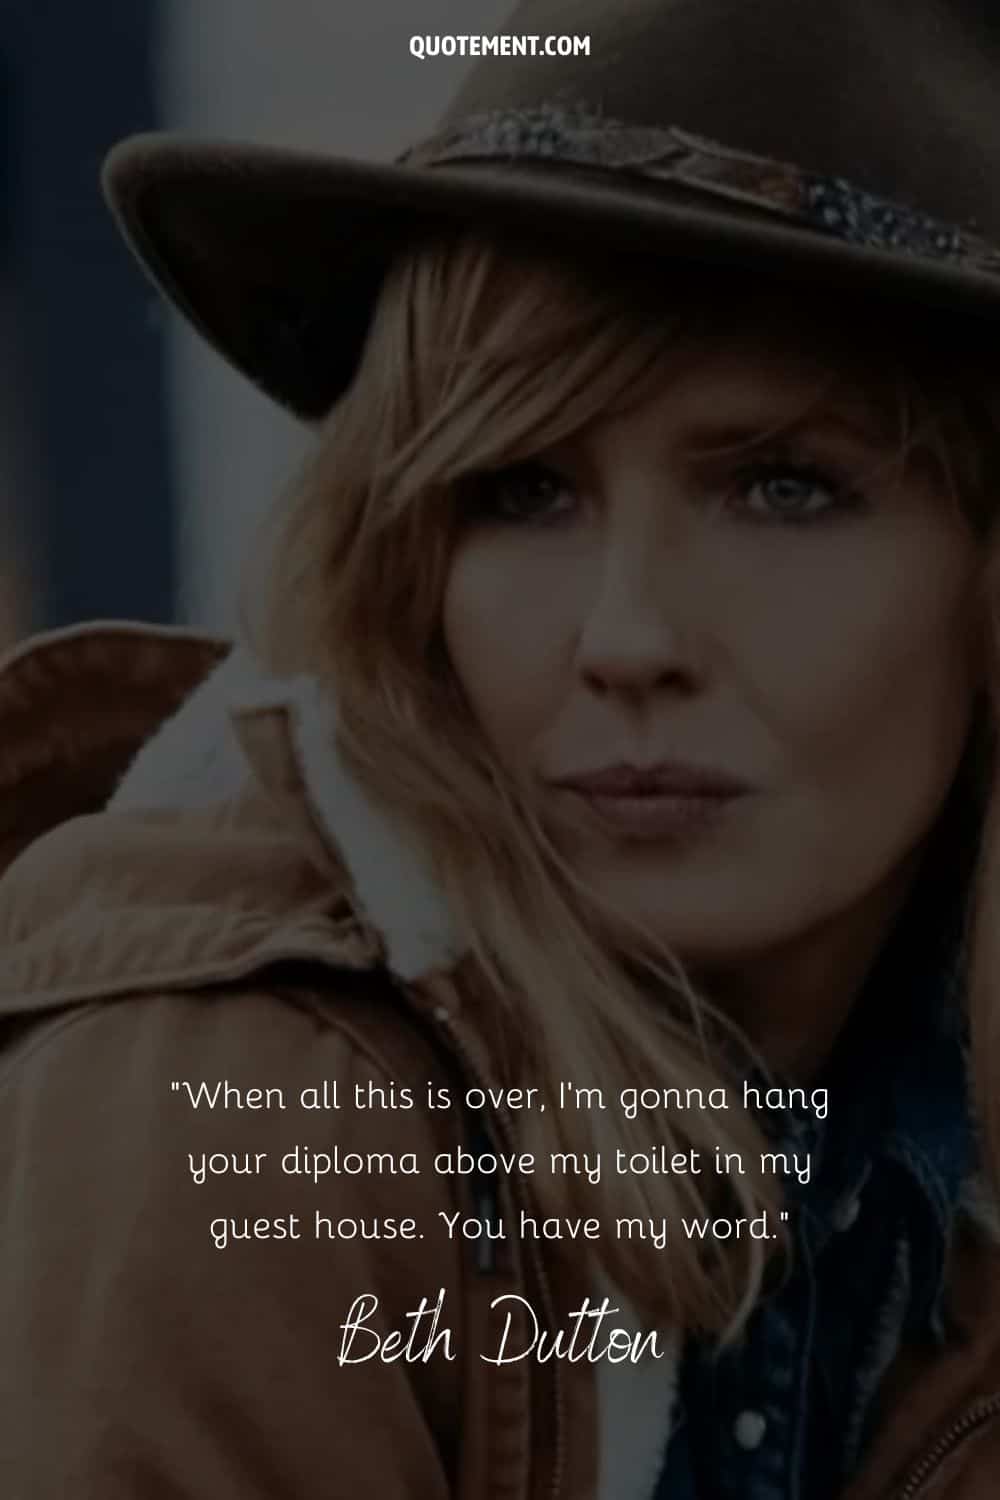 Beth Dutton wearing a hat representing fierce quote by Beth Dutton